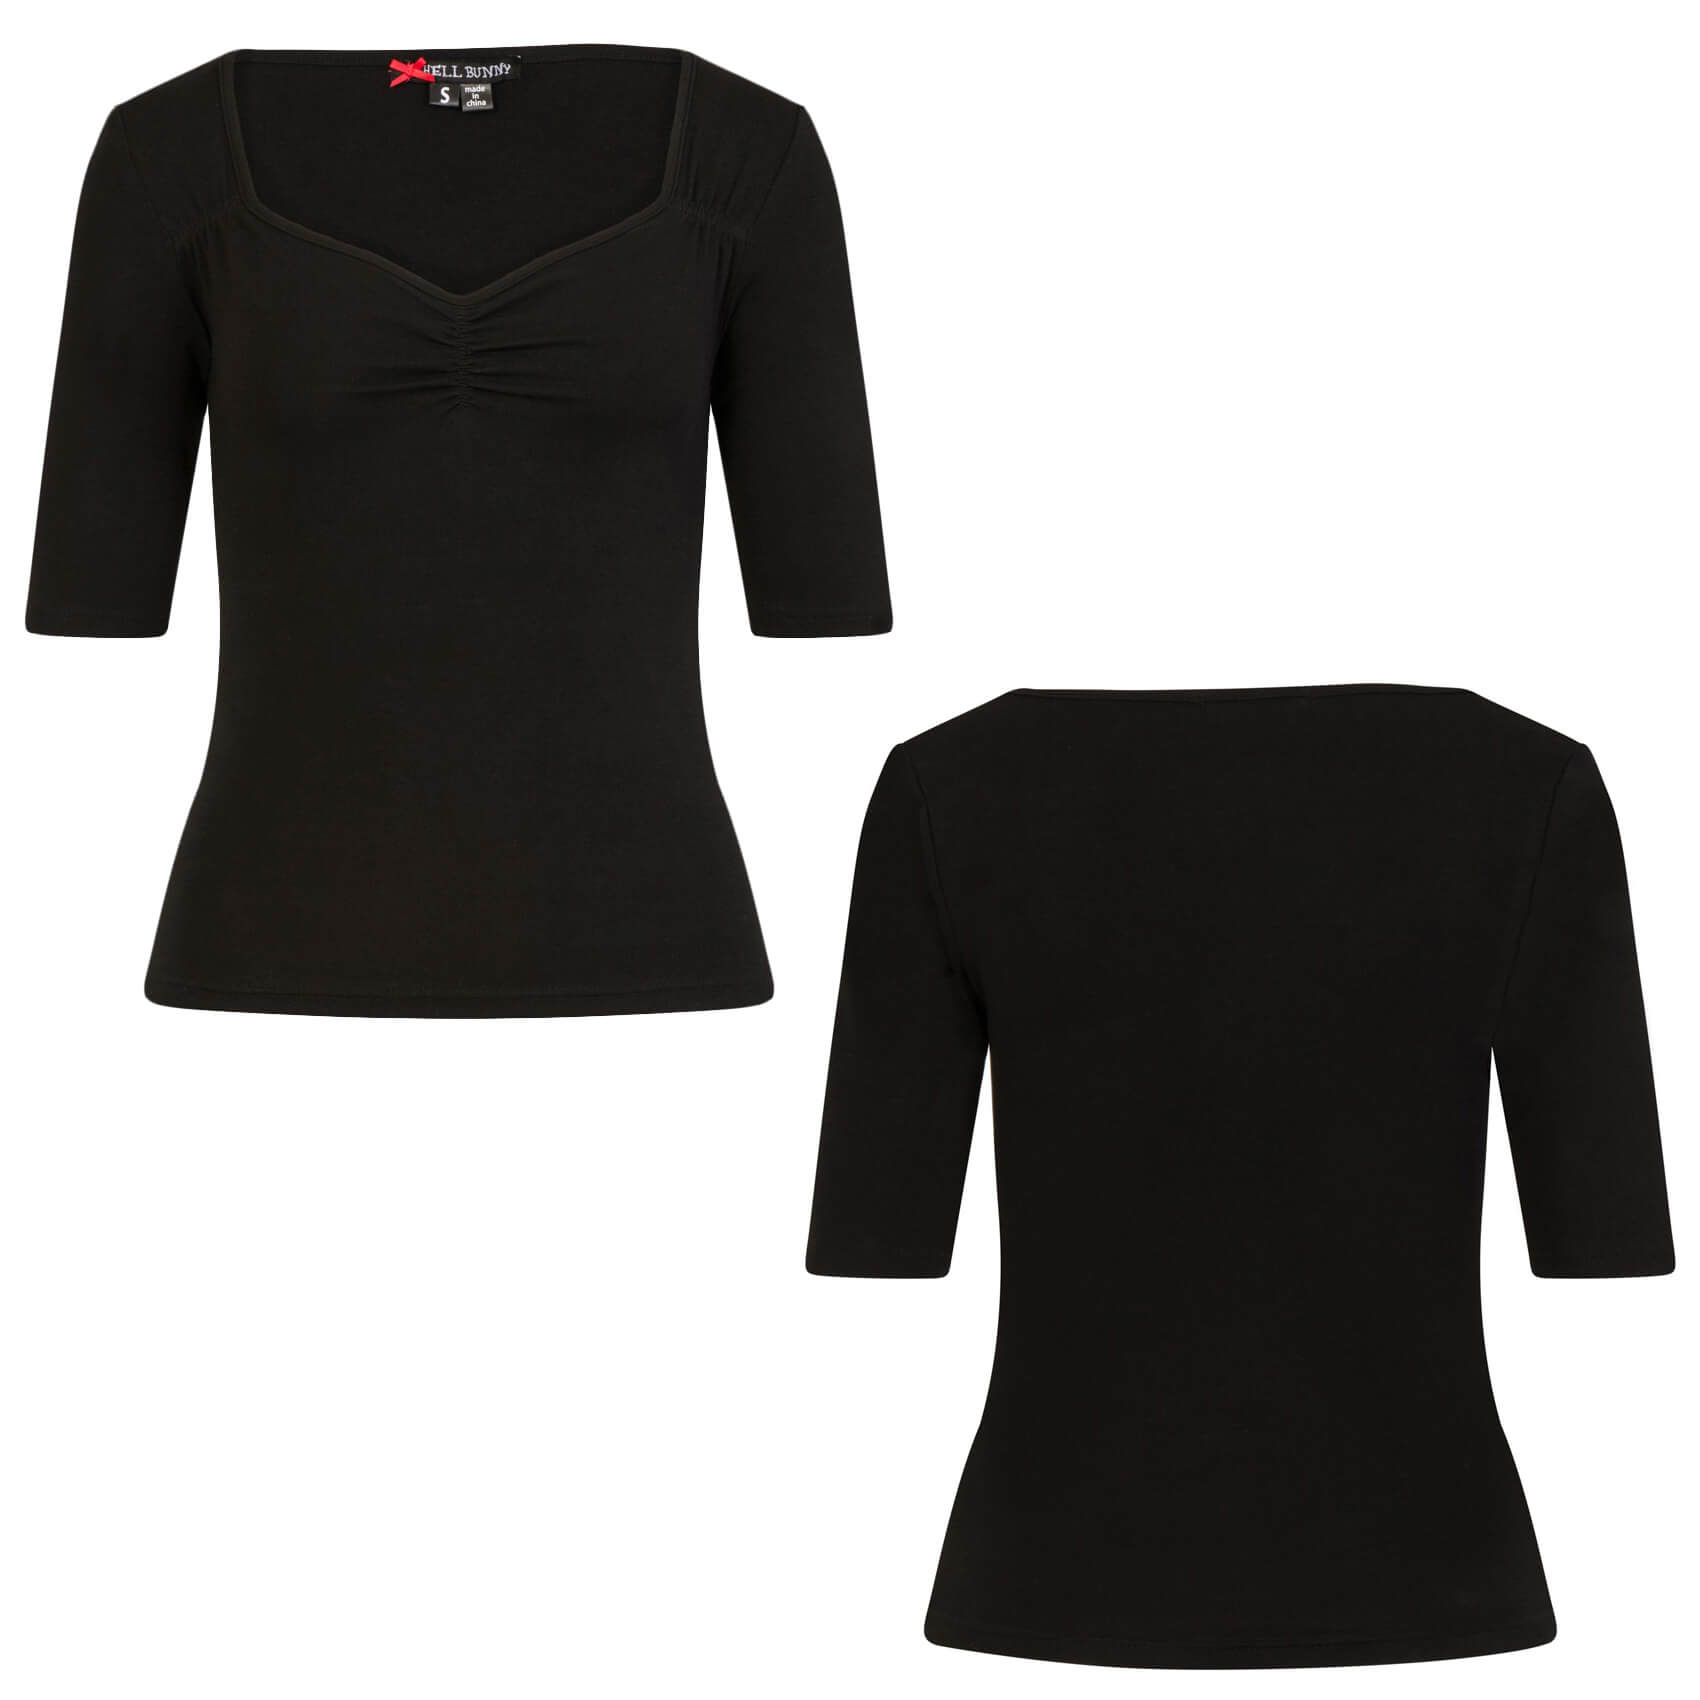 a front and back imge of the philippa top laying flat